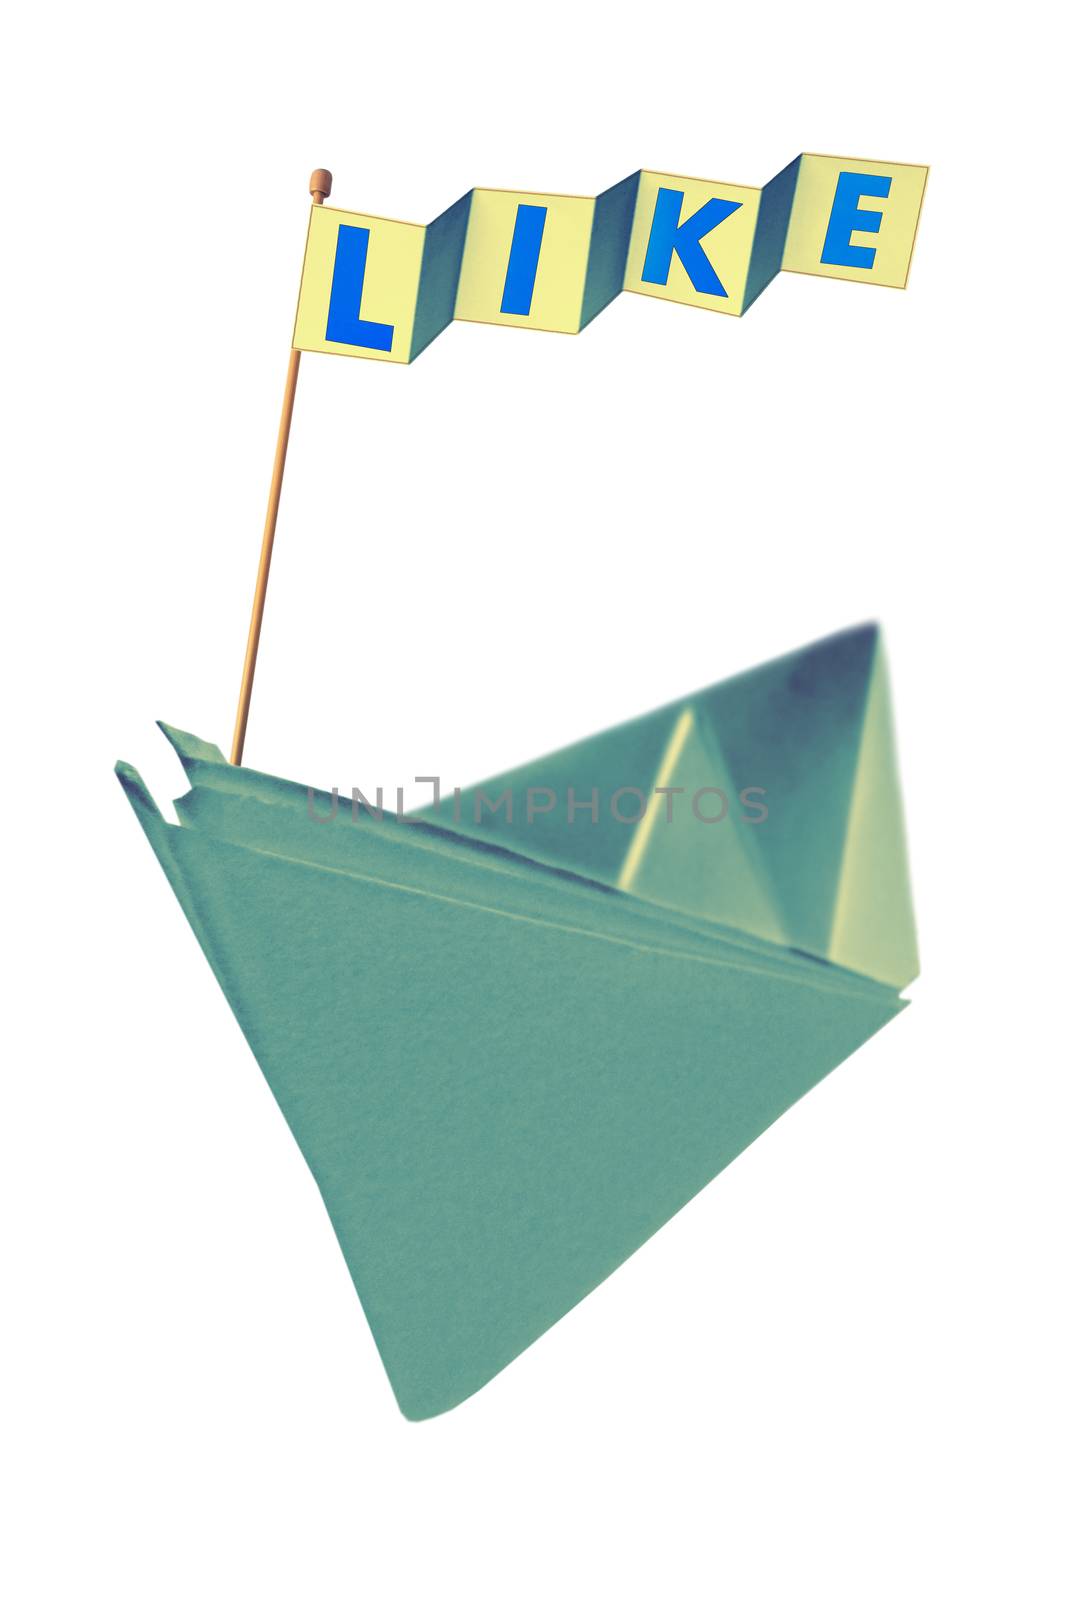 Origami paper boat with flag writing LIKE by yands